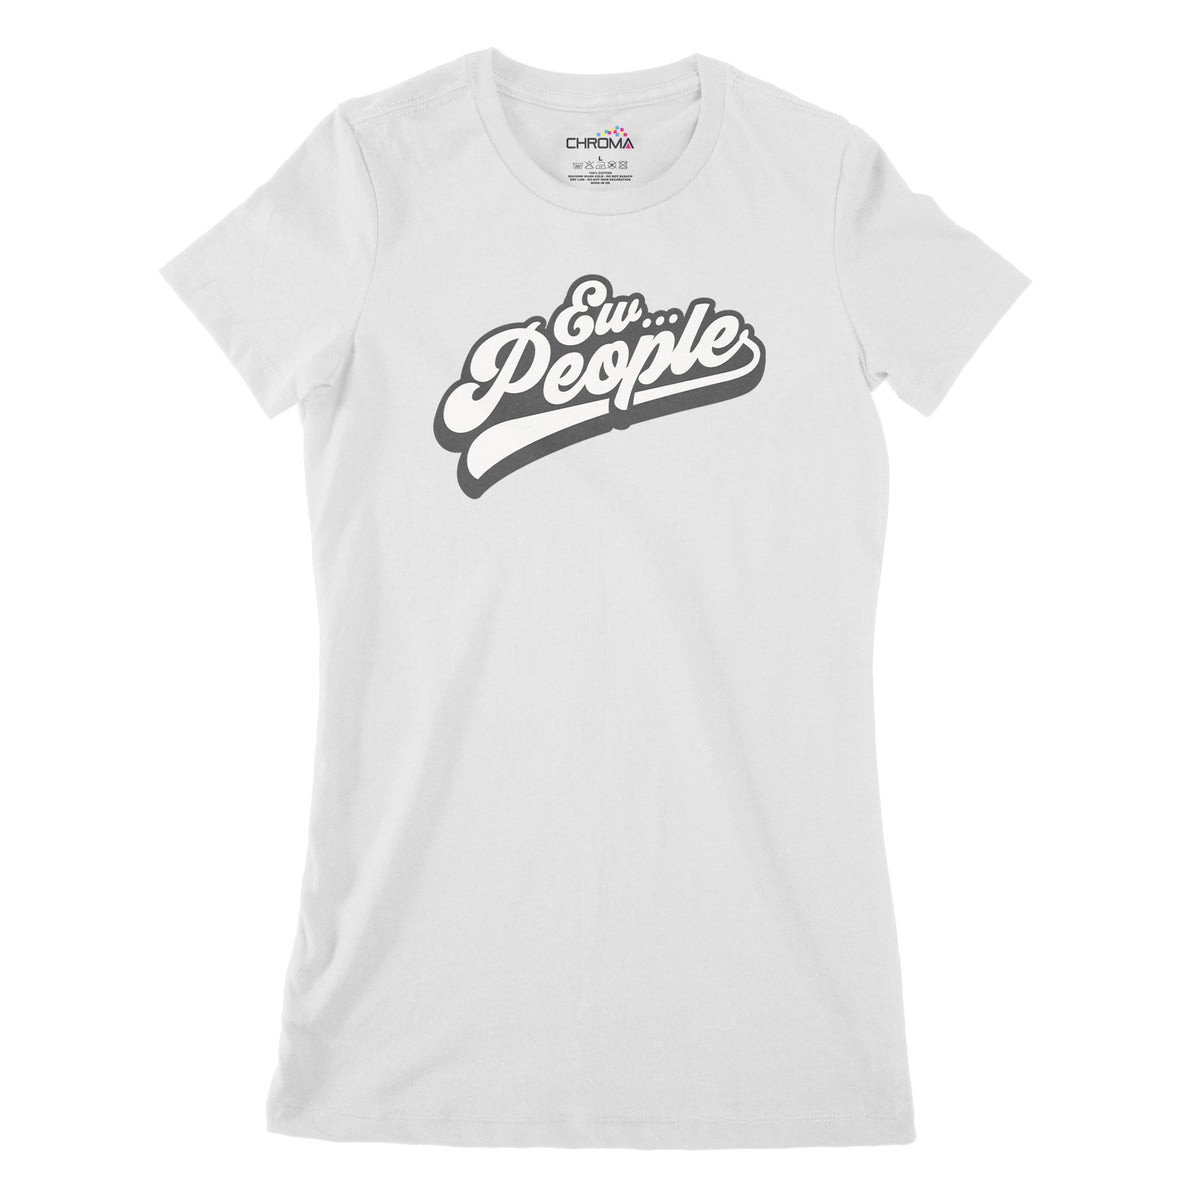 Ew, People | Women's Classic Fitted T-Shirt Chroma Clothing